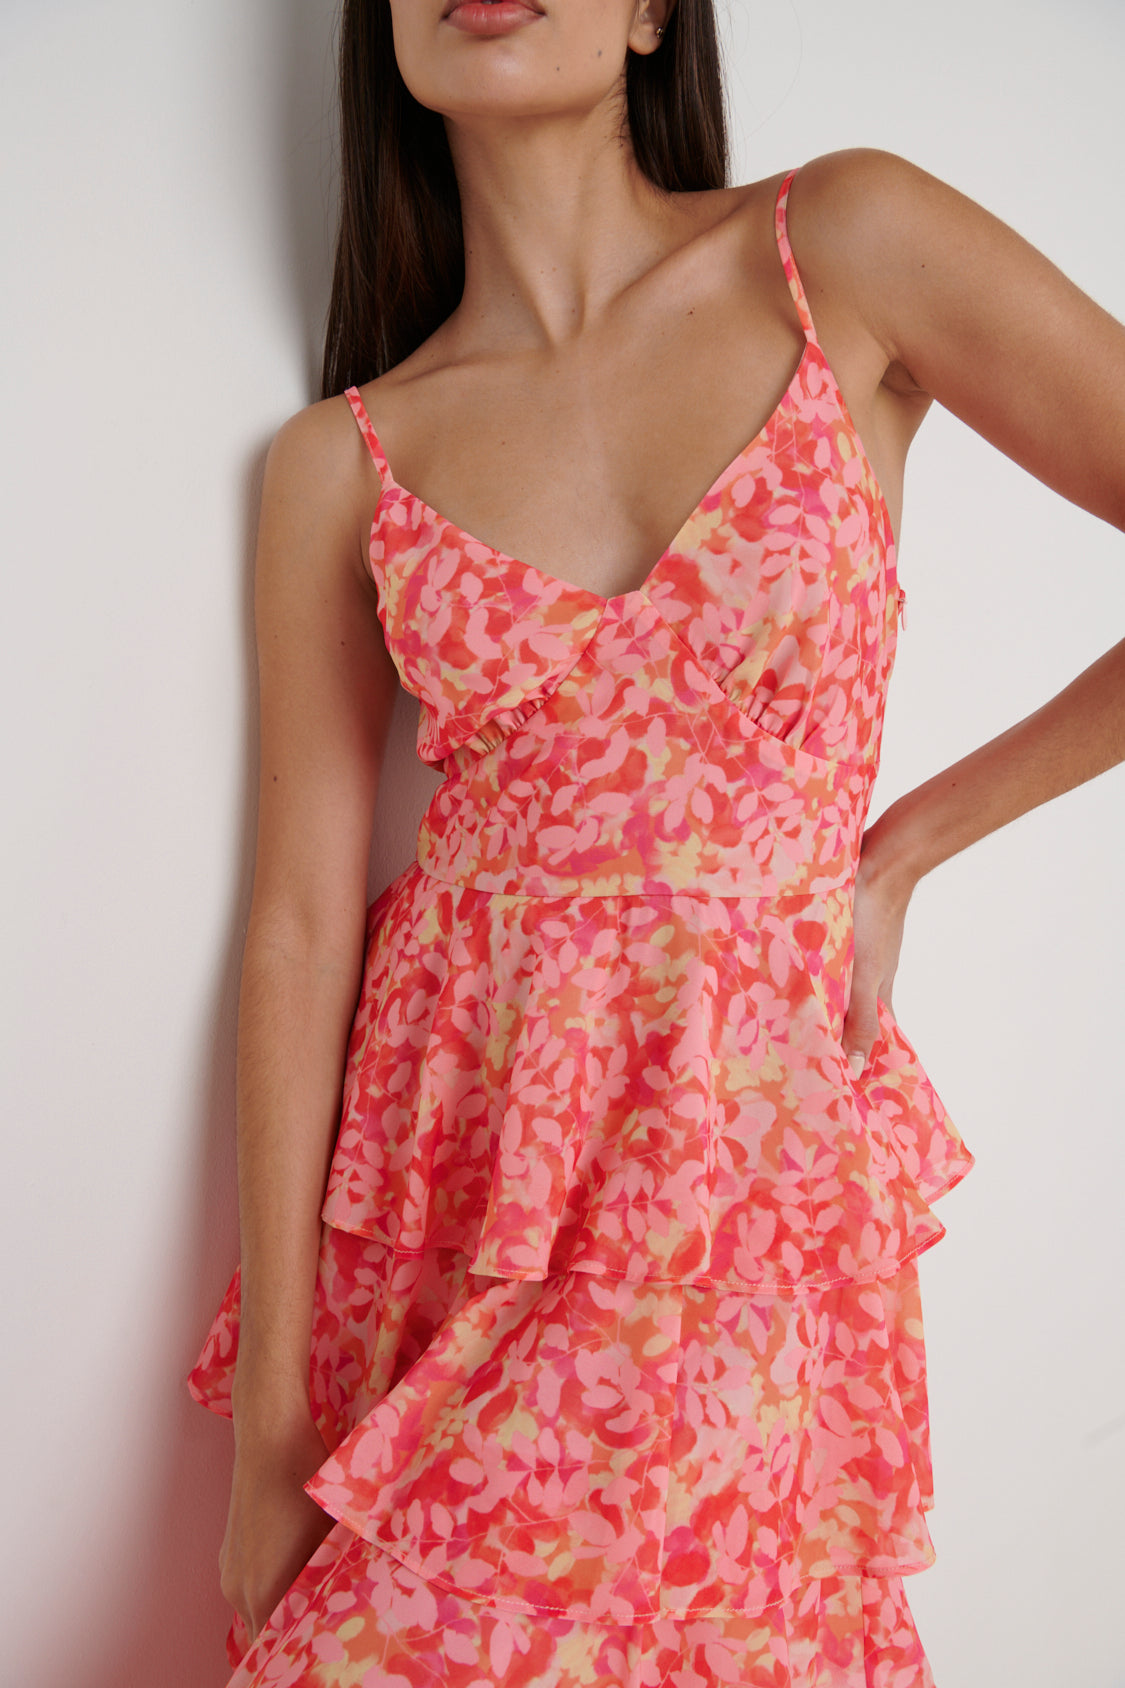 Lissy Ruffle Midaxi Dress - Orange and Pink Floral